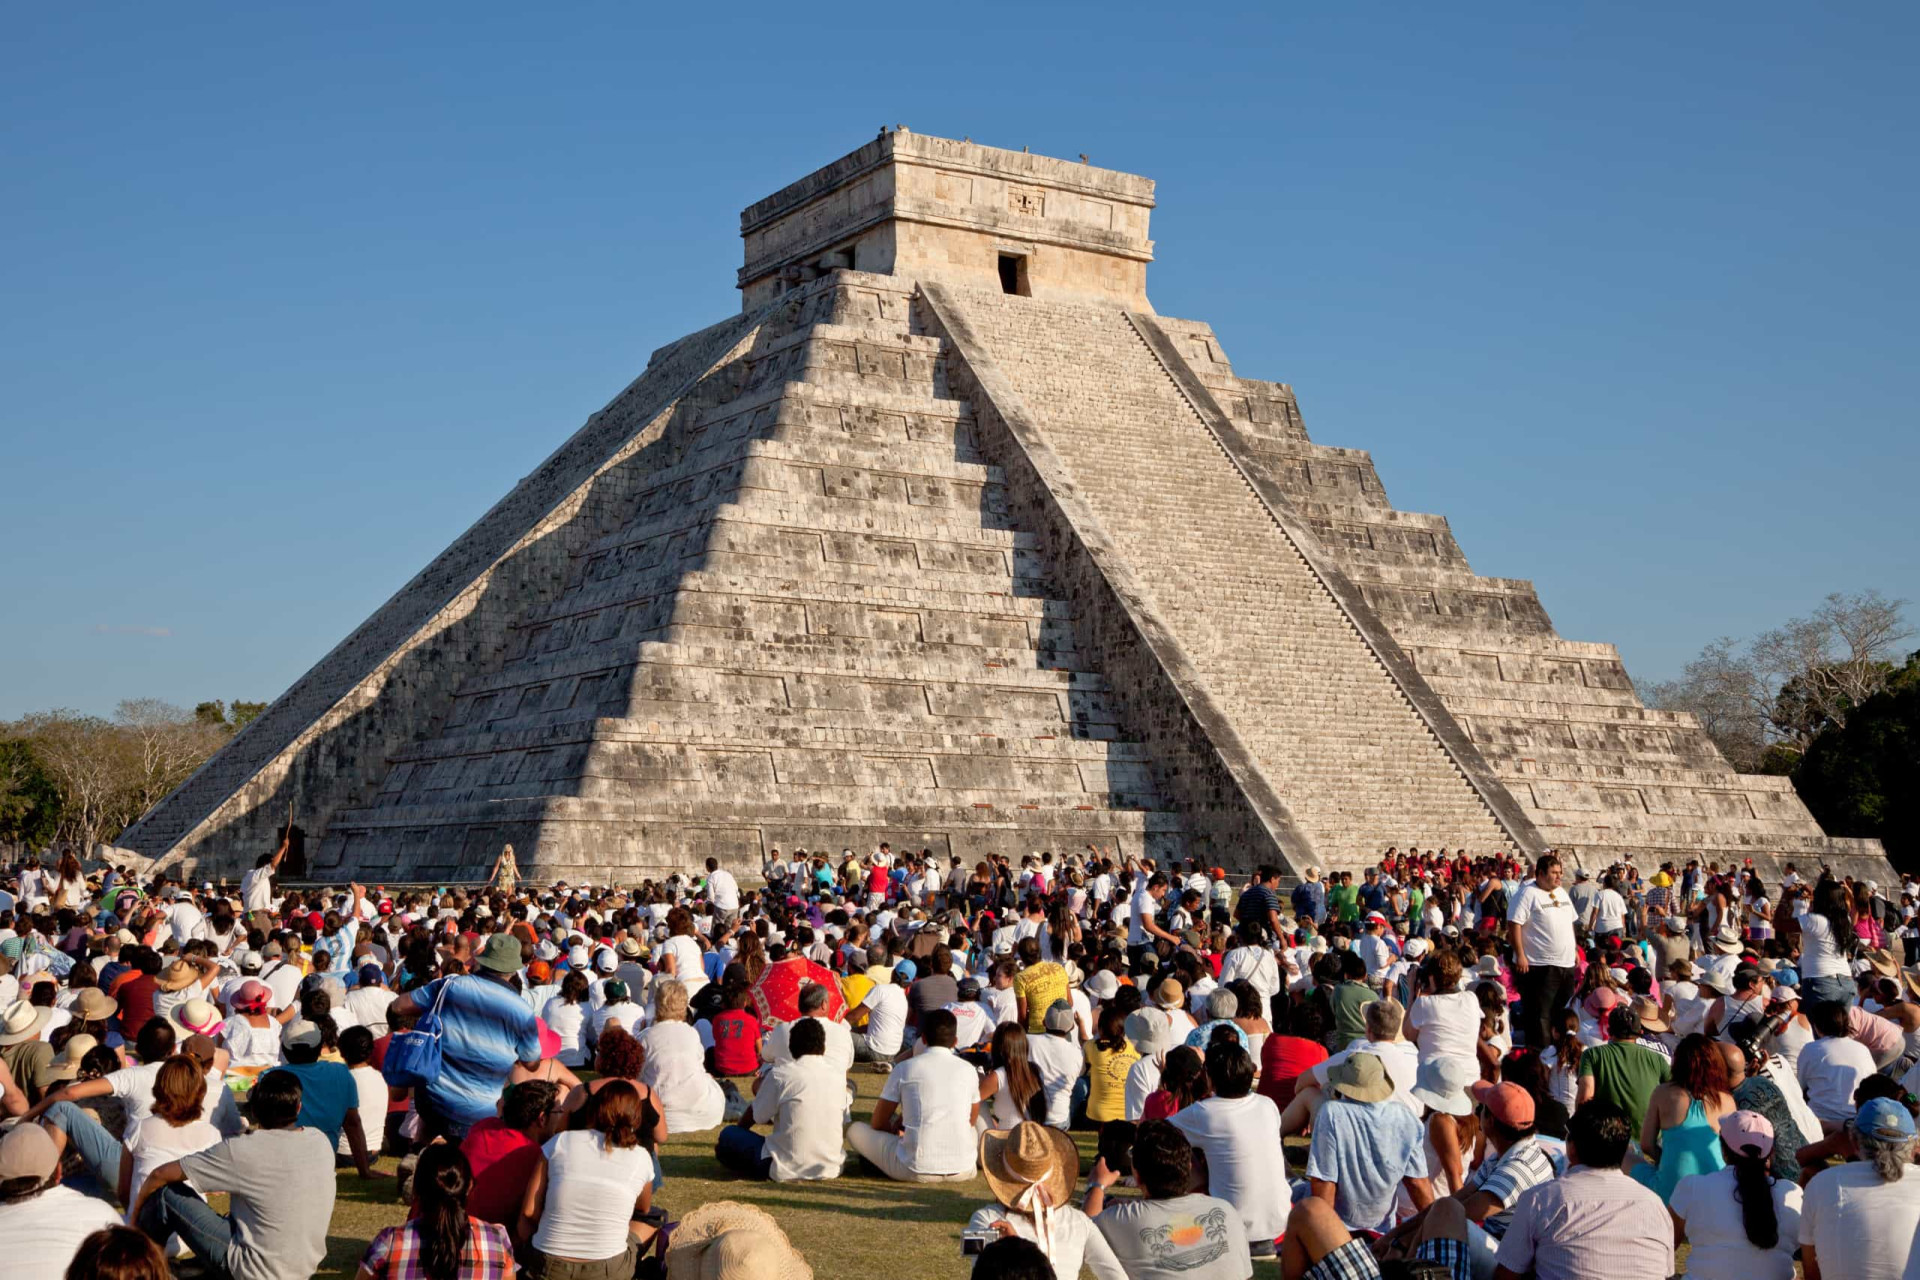 <p>One of the most visited archaeological sites in Mexico, Chichen Itza is so overrun by tourists that authorities have closed off a number of monuments to public access. While visitors can still walk around them, they can no longer enter inner chambers or climb exteriors.</p><p><a href="https://www.msn.com/en-my/community/channel/vid-7xx8mnucu55yw63we9va2gwr7uihbxwc68fxqp25x6tg4ftibpra?cvid=94631541bc0f4f89bfd59158d696ad7e">Follow us and access great exclusive content every day</a></p>